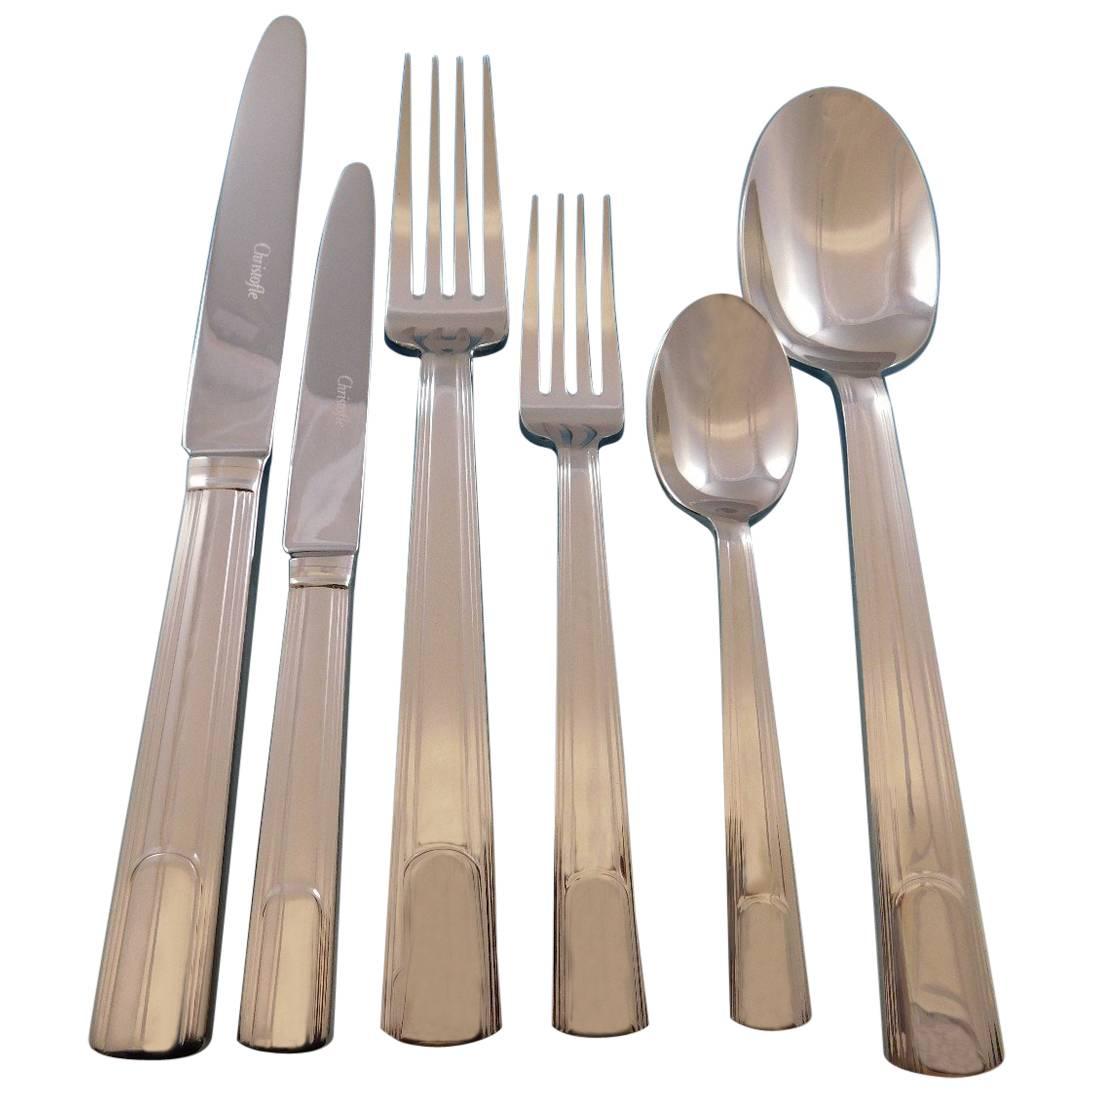 Hudson by Christofle France Stainless Steel Set Service for 12 Dinner New 74 Pcs